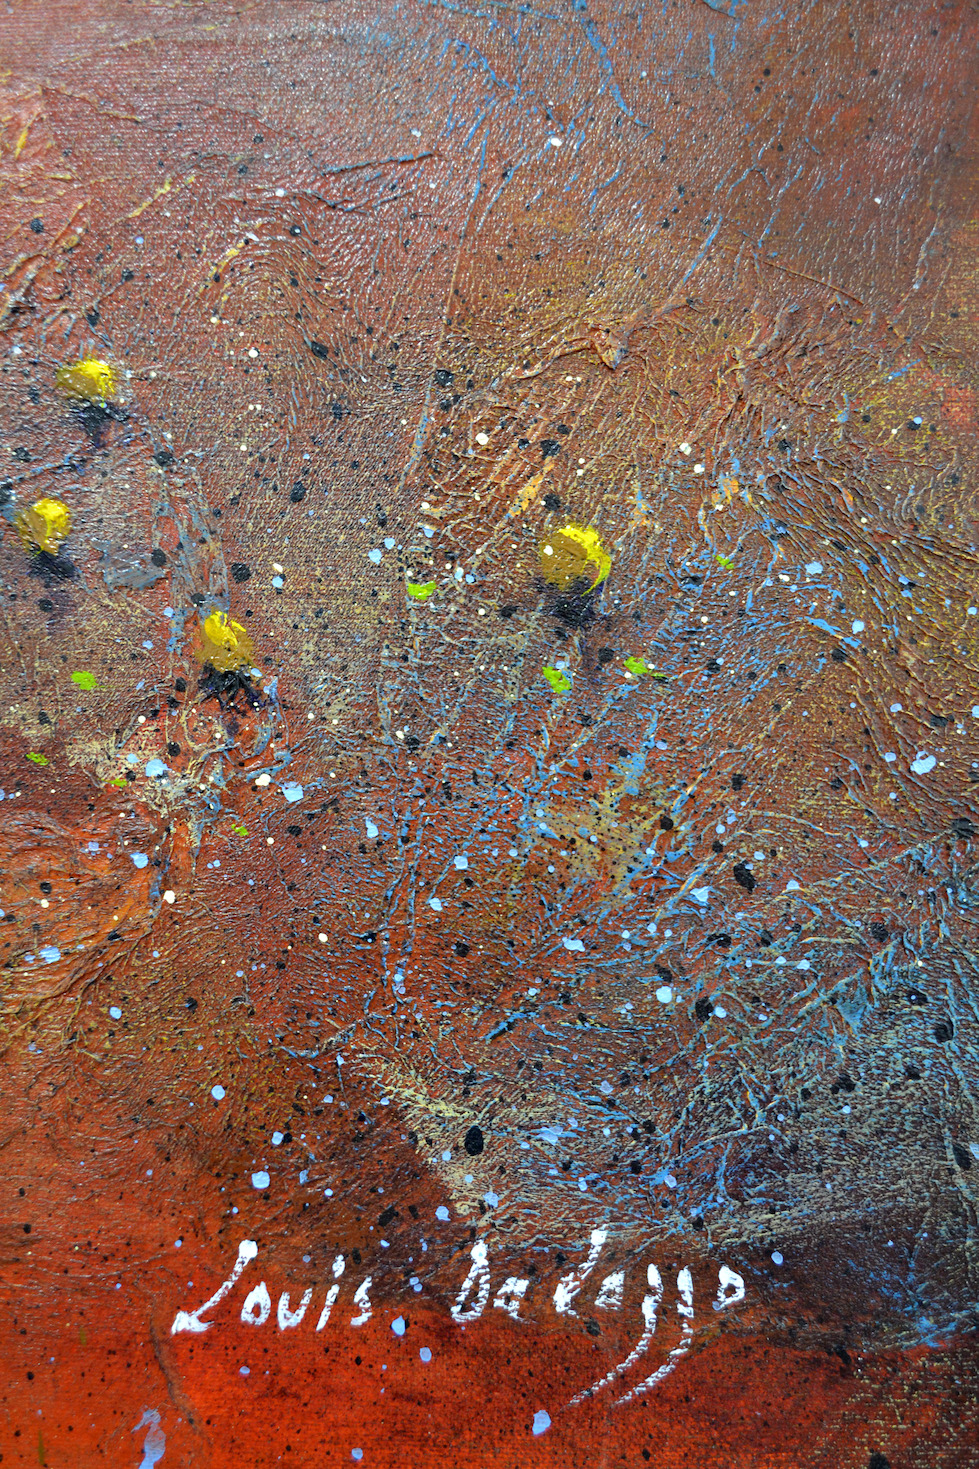 Close Up Signature Of Acrylic Painting "Road to The Horizon from Above" By Louis Dalozzo